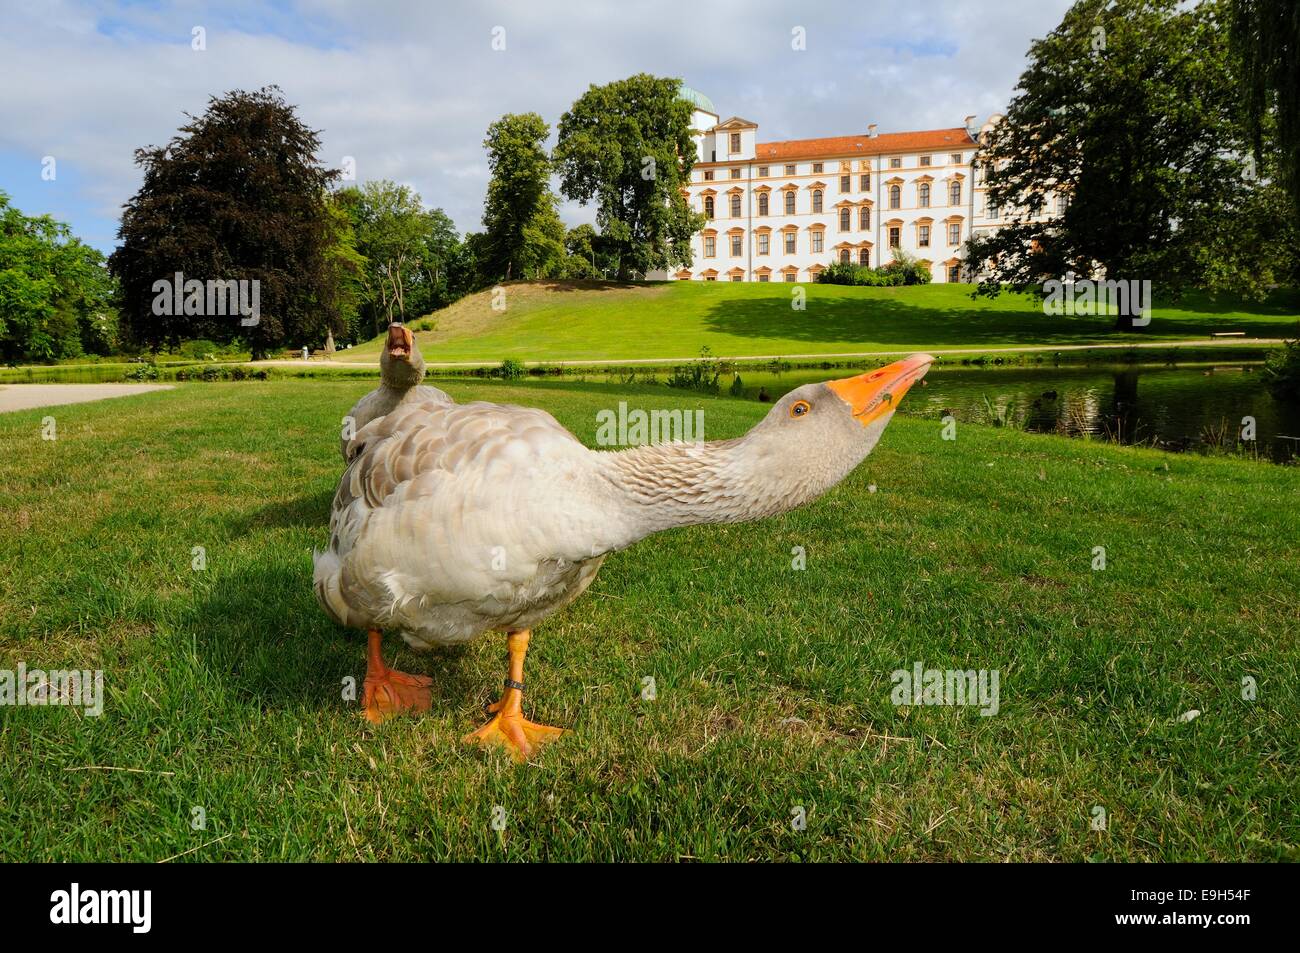 Schimpf end goose in front of Schloss Celle, Celle, Lower Saxony, Germany Stock Photo